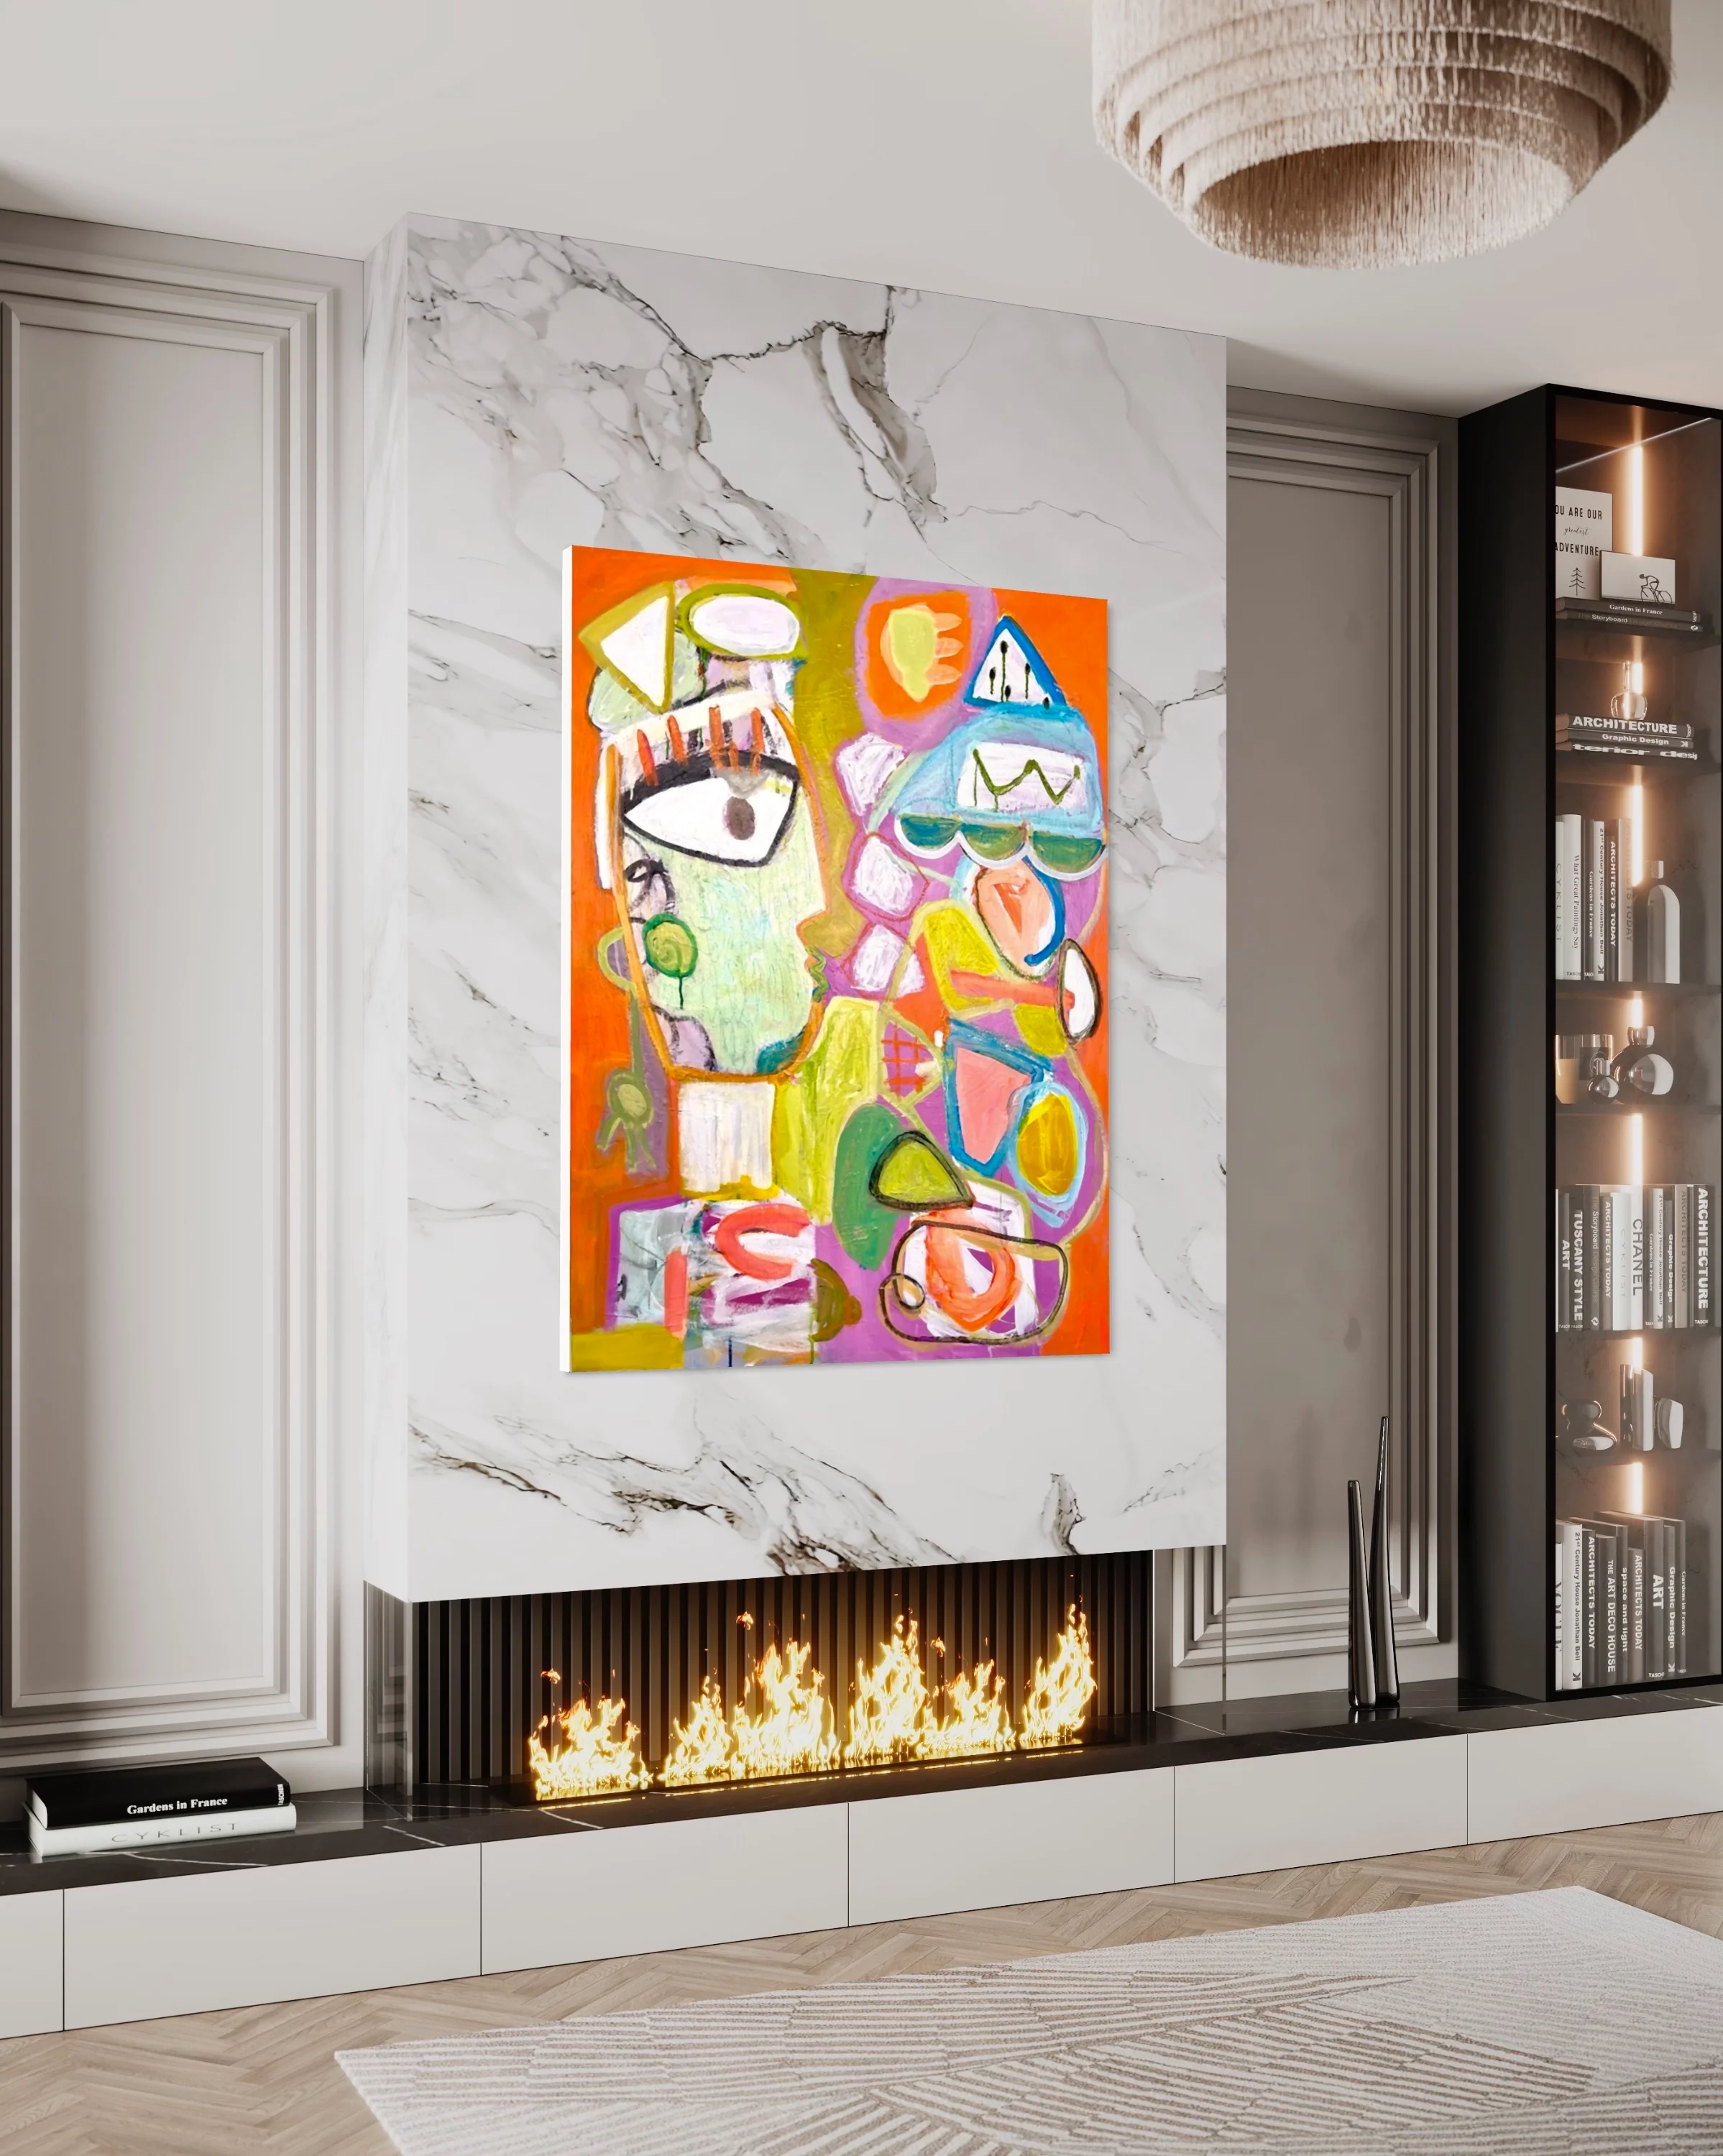 A colorful orange abstract portrait painting hangs above a modern fireplace.